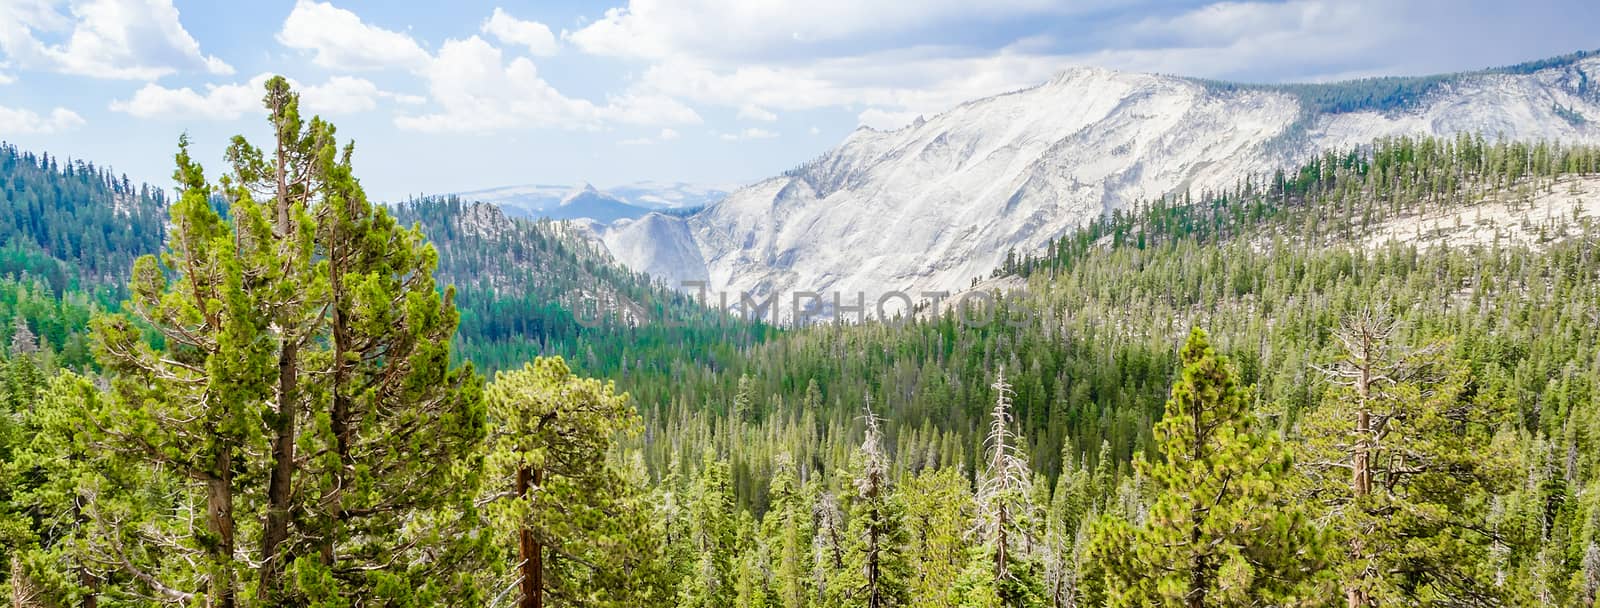 Beautiful Green Valley with Forest at Yosemite National Park, California, USA